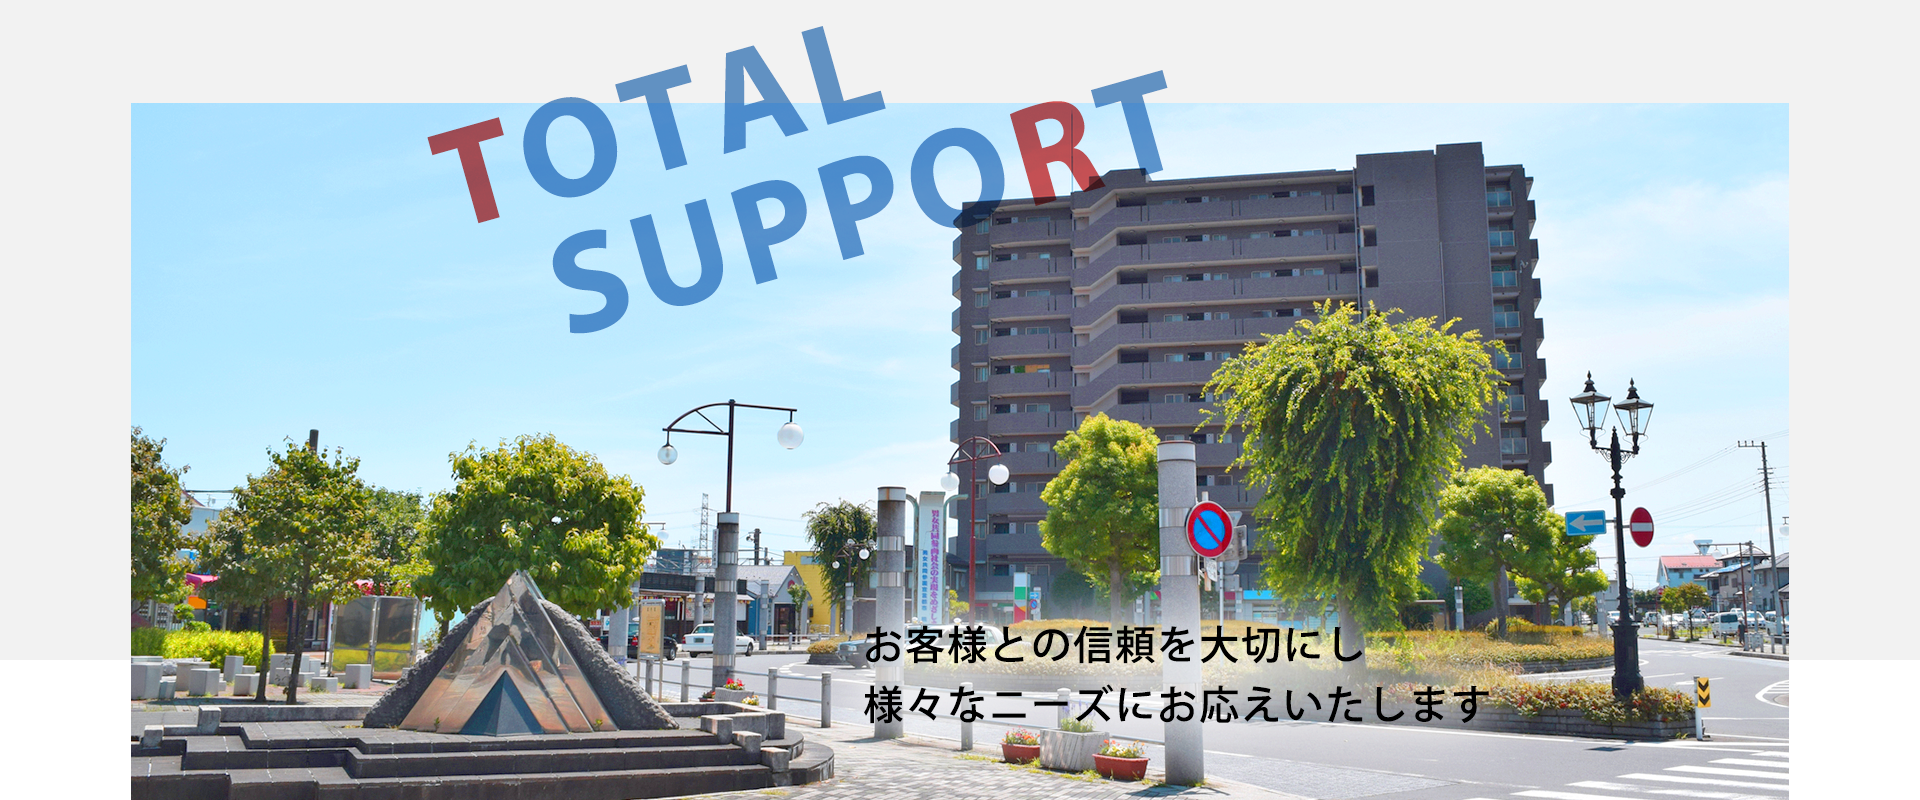 TOTAL SUPPORT